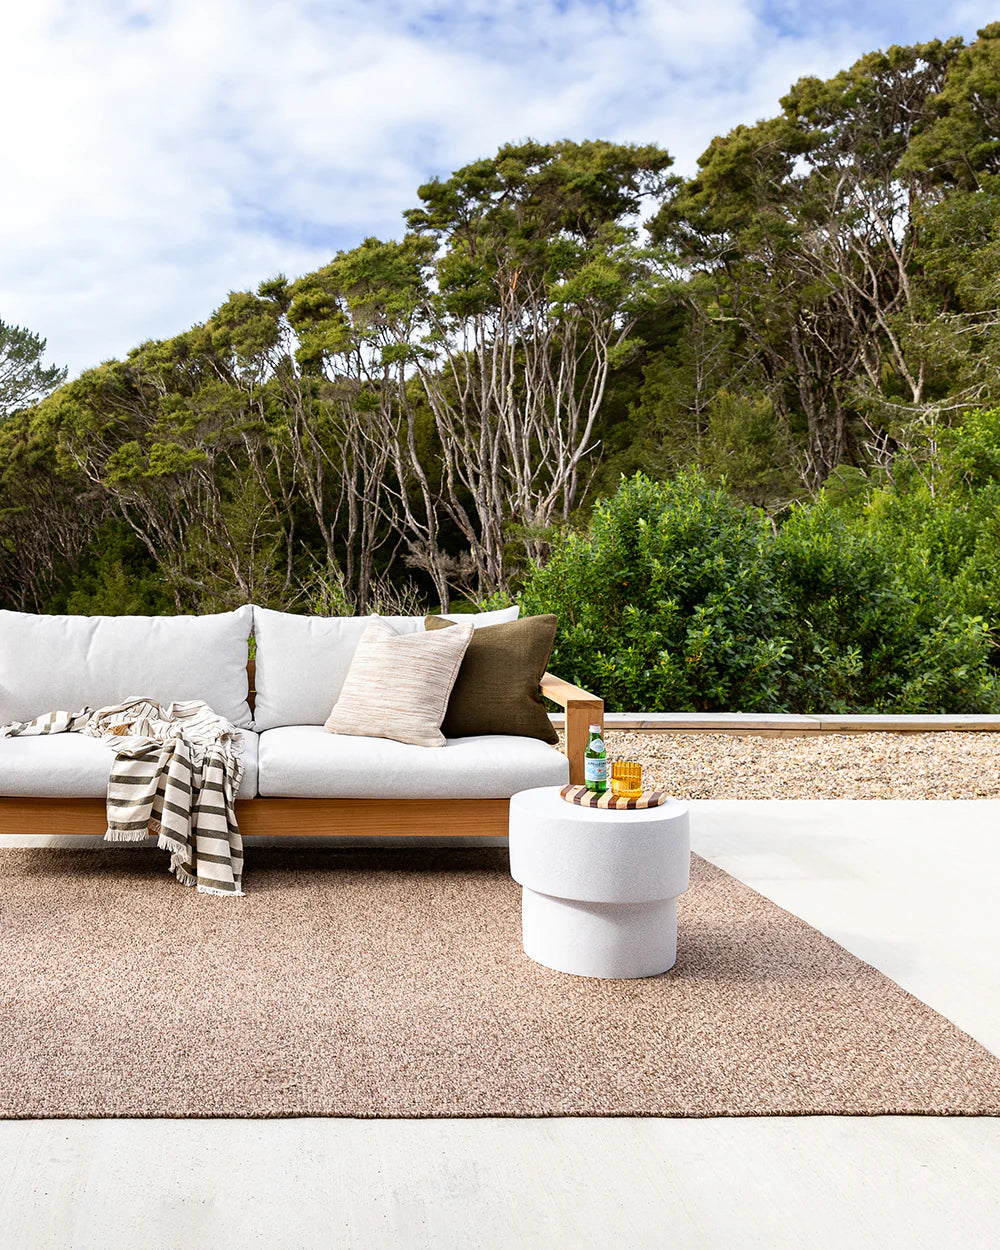 Burleigh Outdoor PET Rug from Baya Furtex Stockist Make Your House A Home, Furniture Store Bendigo. Free Australia Wide Delivery.